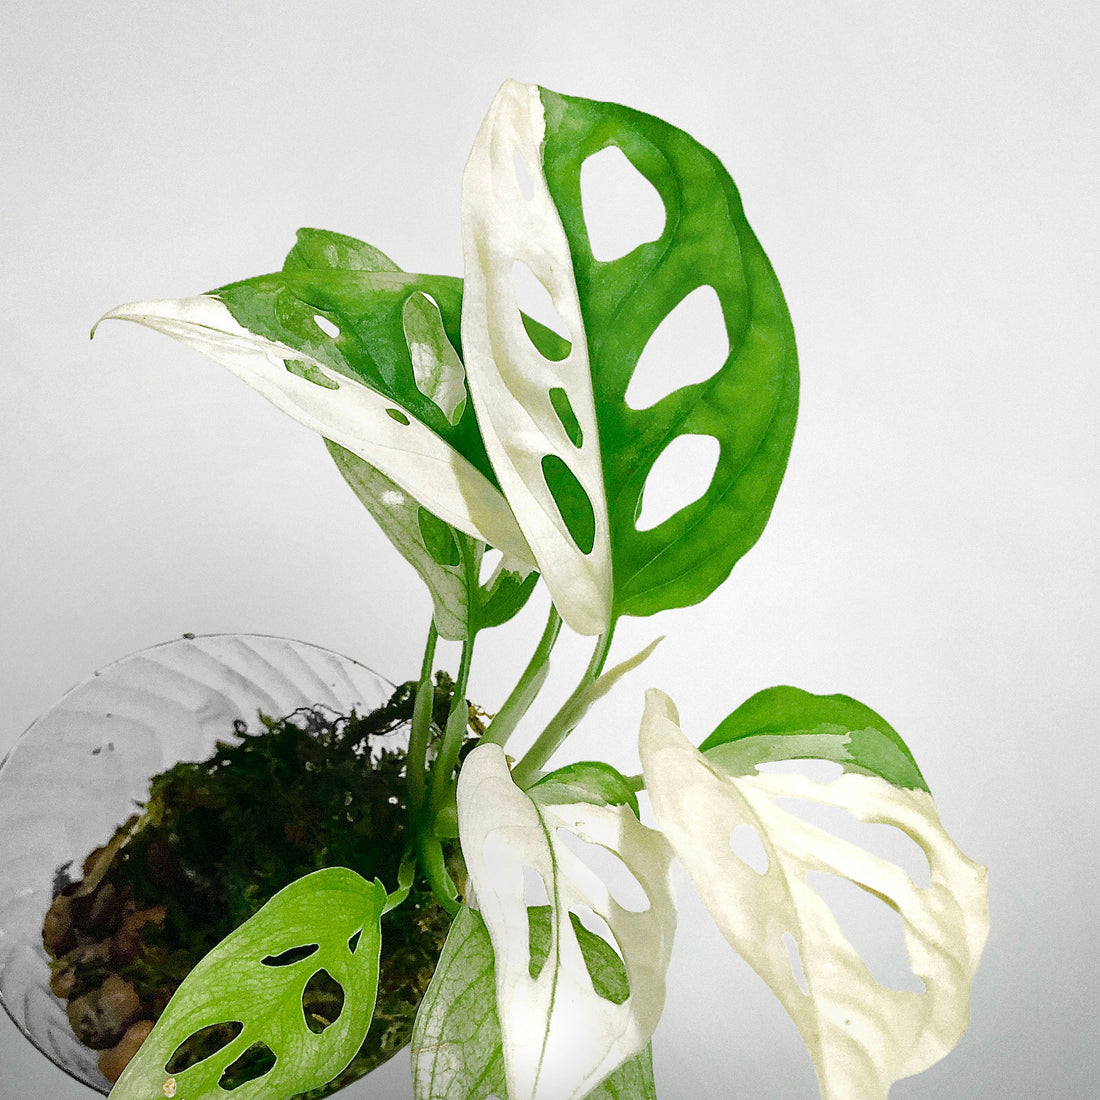 How can I make money by growing Variegated Monstera adansonii?